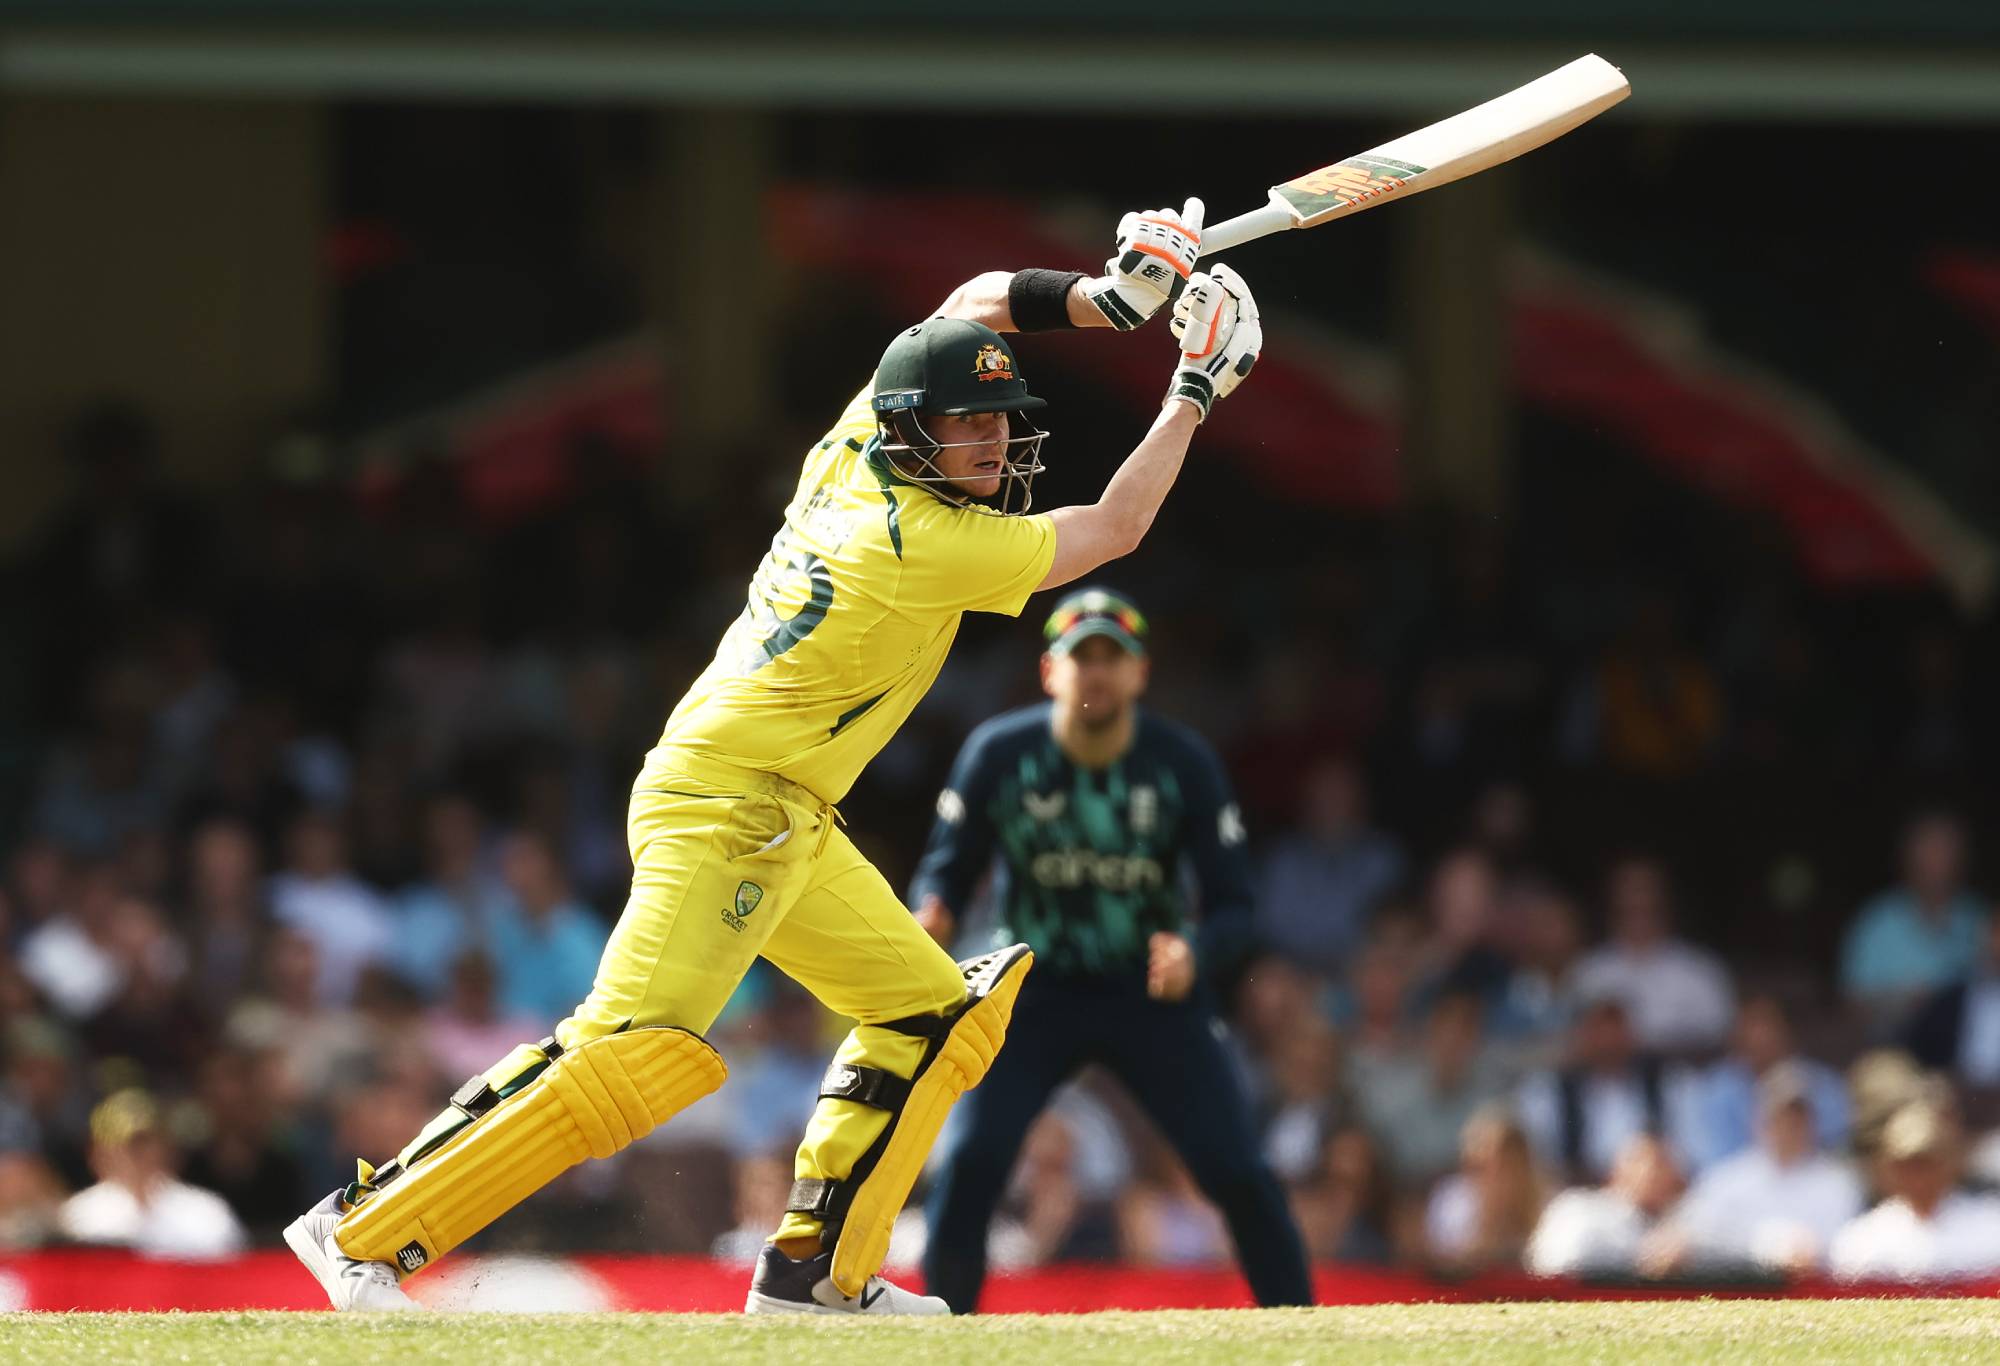 SYDNEY, AUSTRALIA - NOVEMBER 19: Steve Smith of Australia bats during the 2nd match of the One Day International series between Australia and England at the Sydney Cricket Ground on November 19, 2022 in Sydney, Australia.  (Photo by Matt King - CA/Cricket Australia via Getty Images)